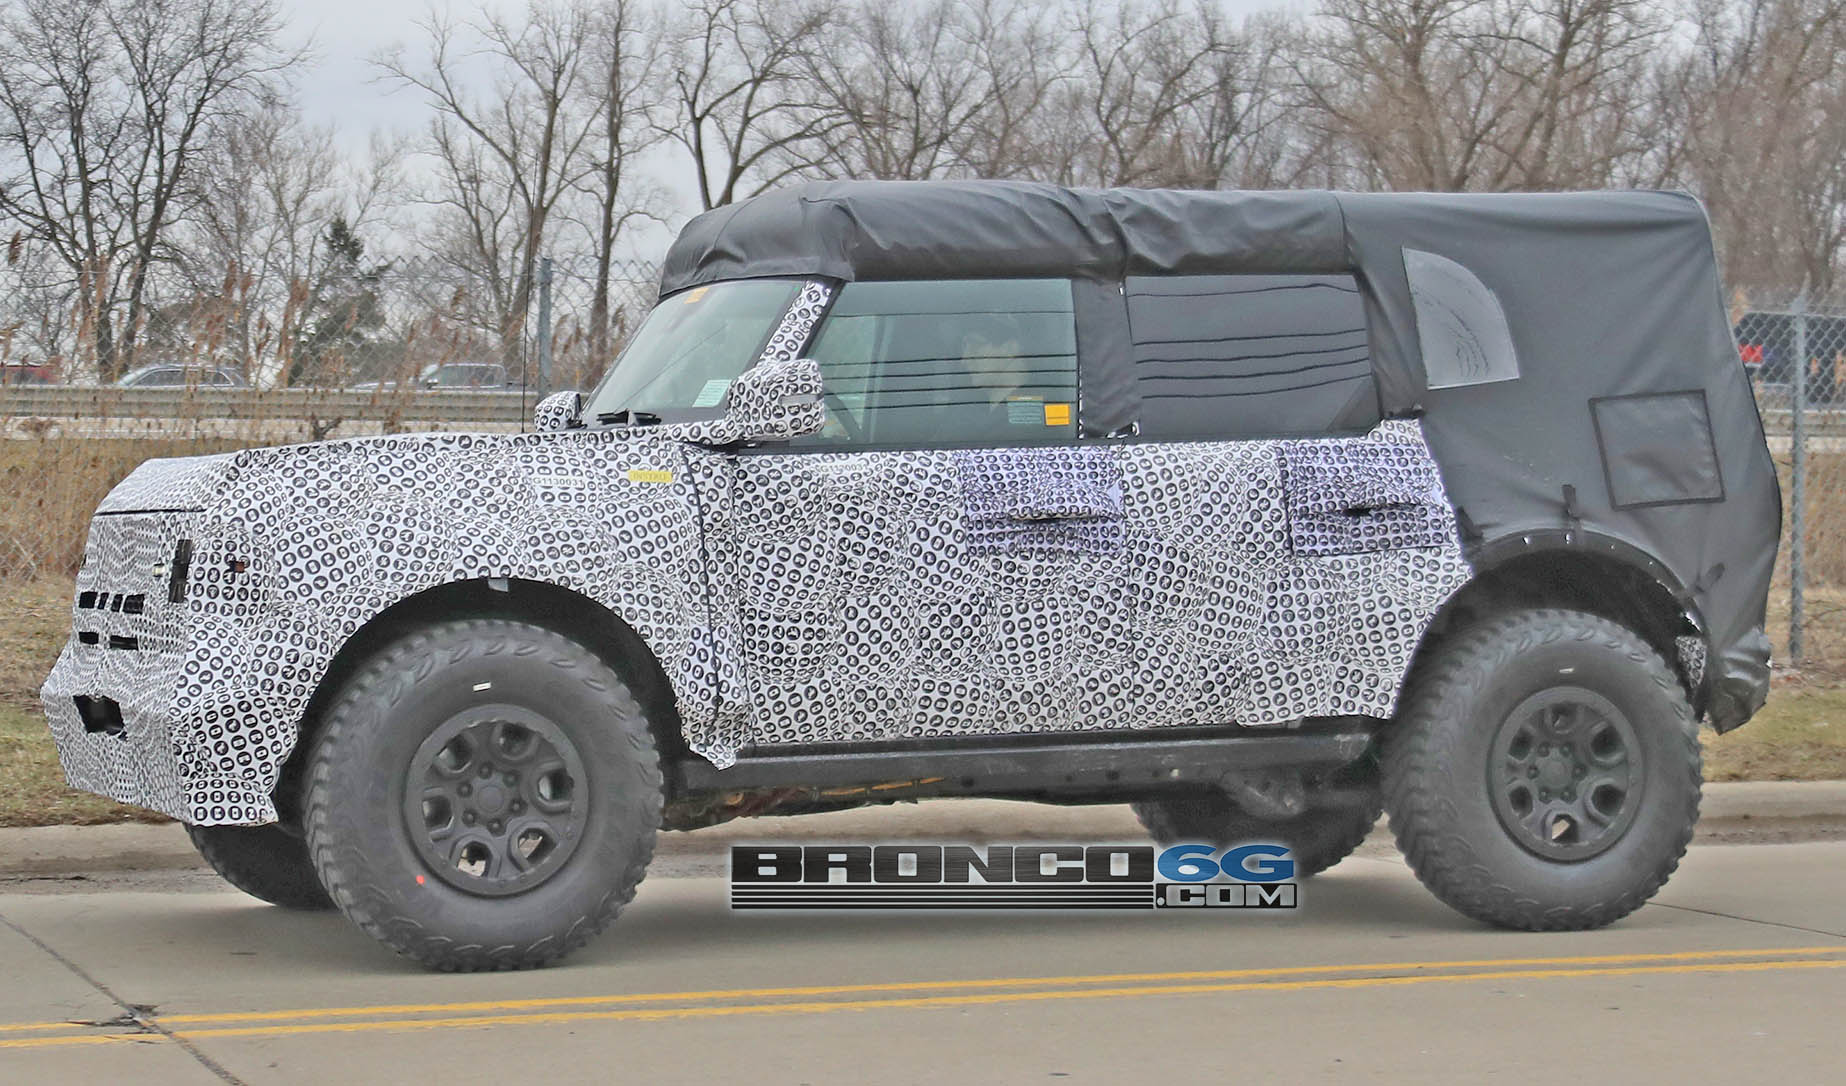 Ford Bronco My observations from seeing see the actual 4-door Bronco raw, unpainted sheet metal shell Jan27 2021_Bronco_OffRoad_009